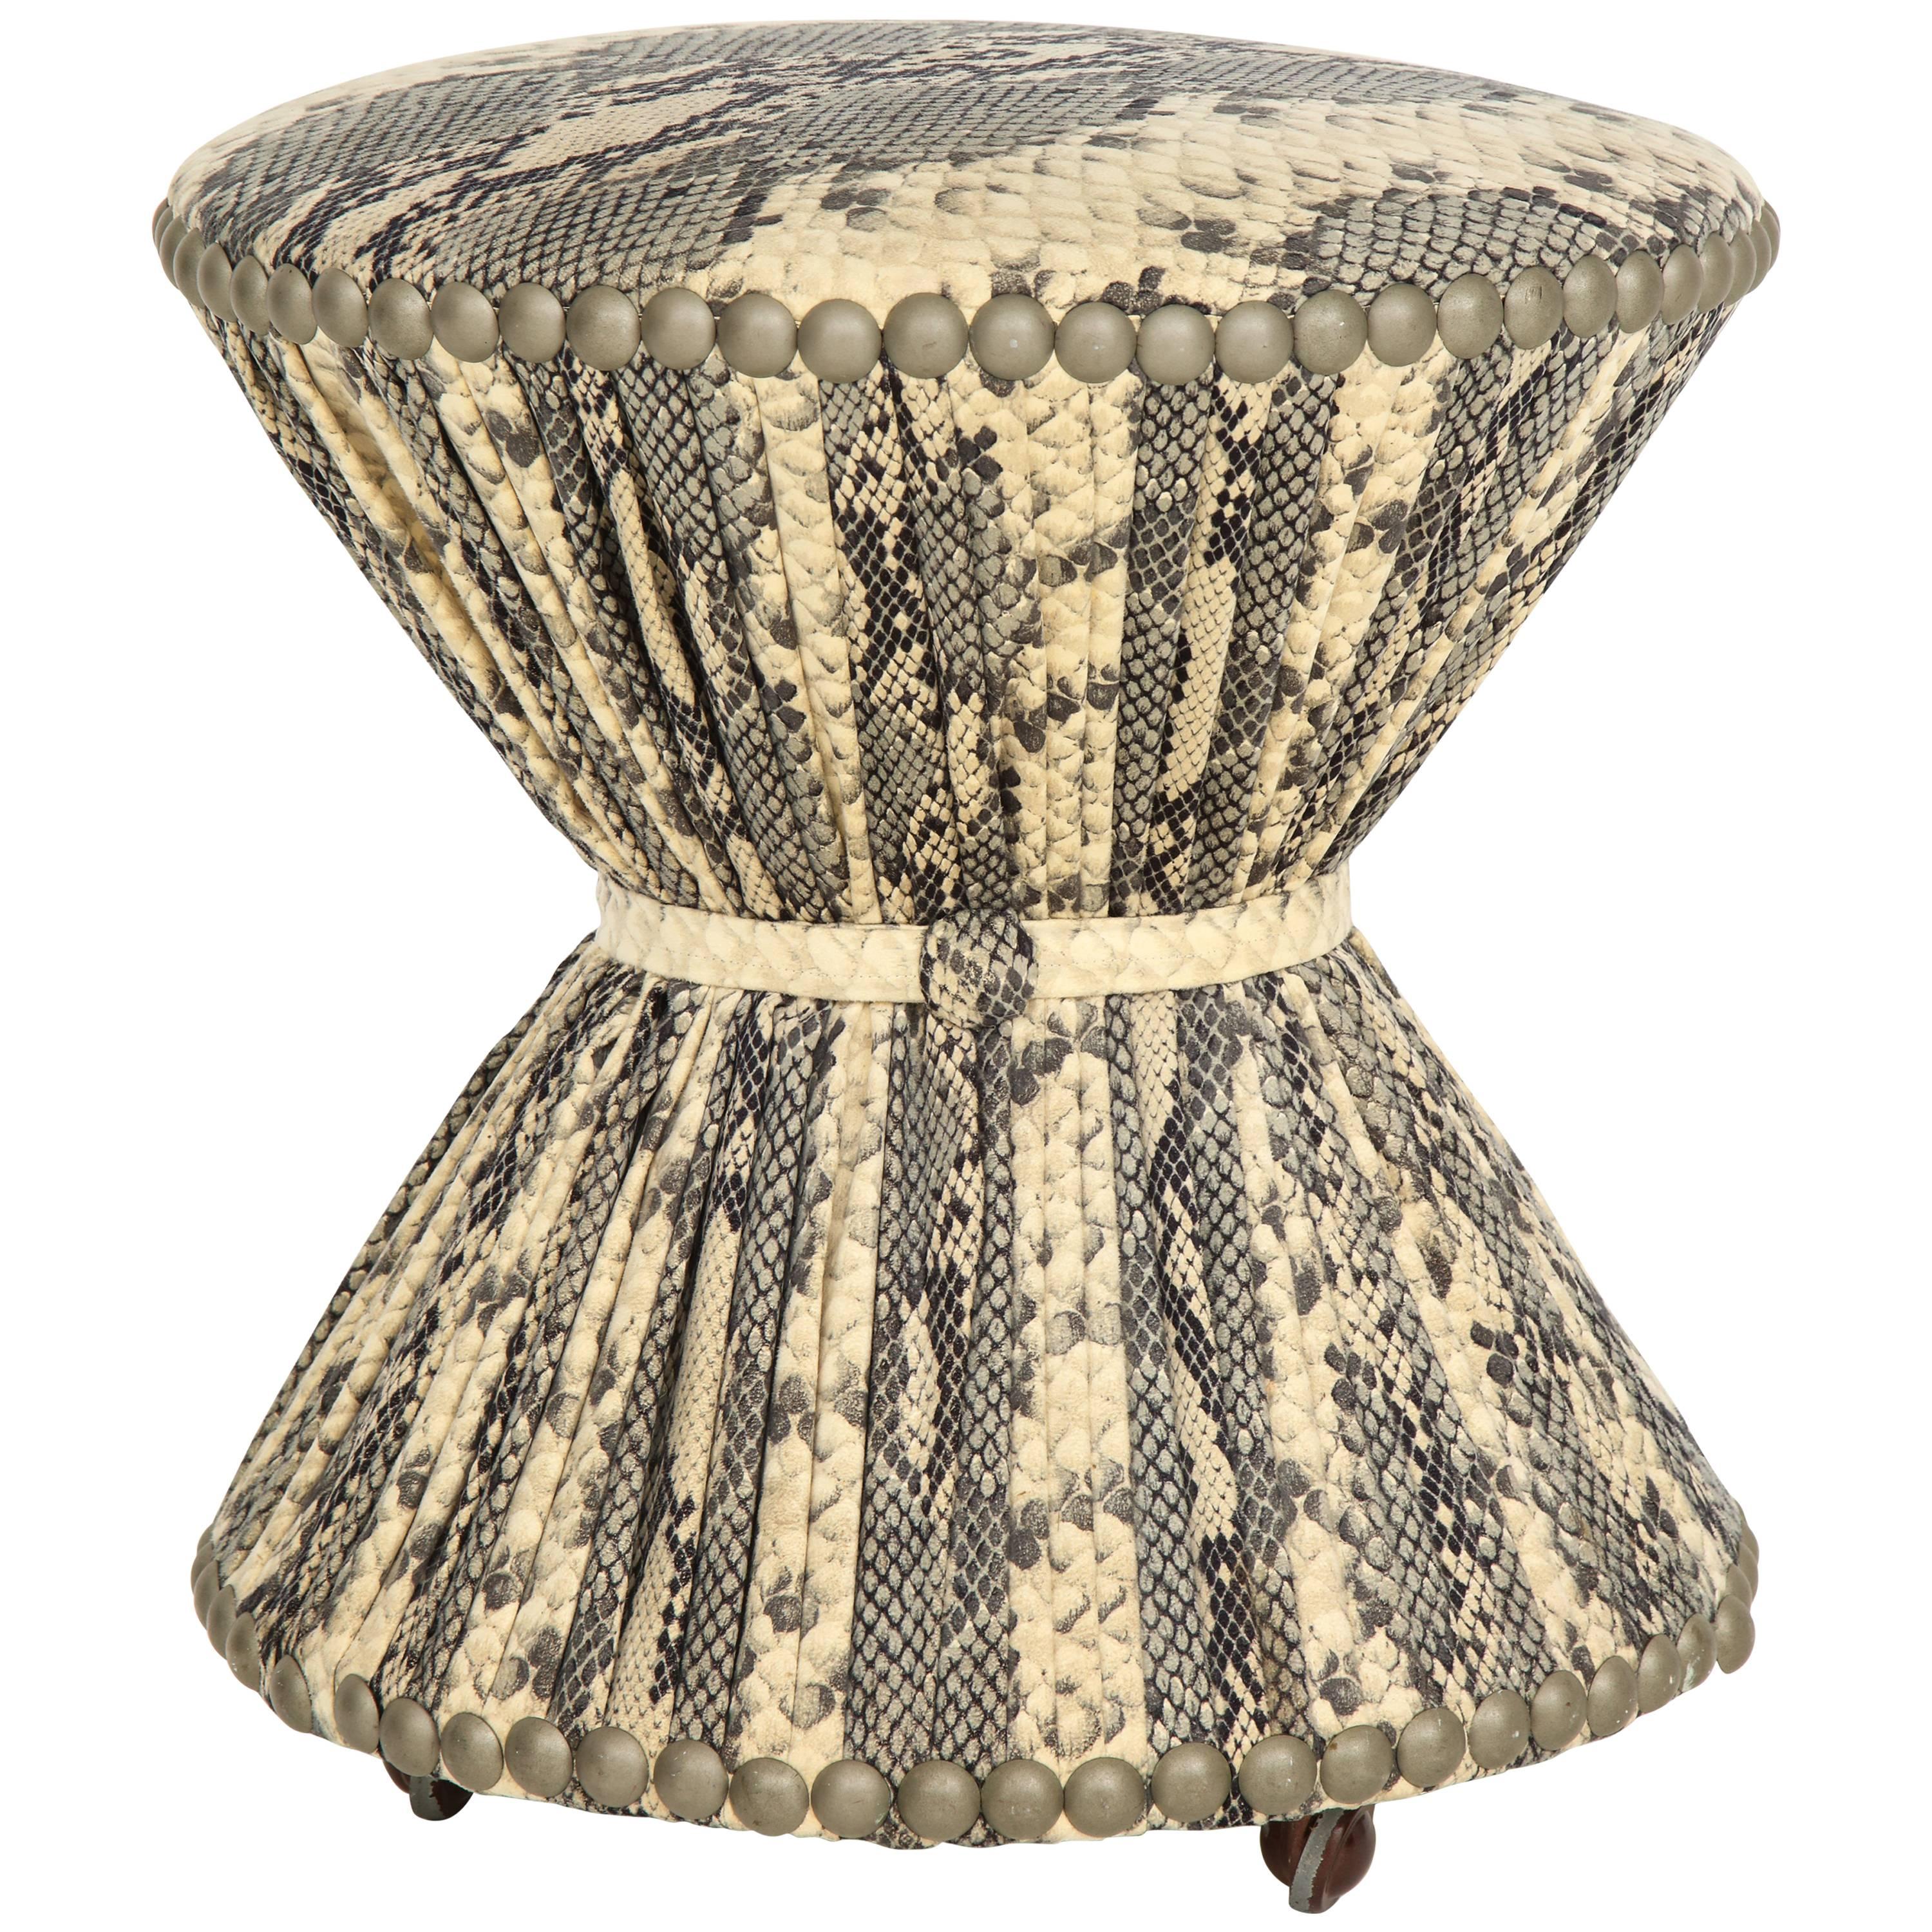 Snakeskin Printed Fabric Stool on Casters with Studded Trim